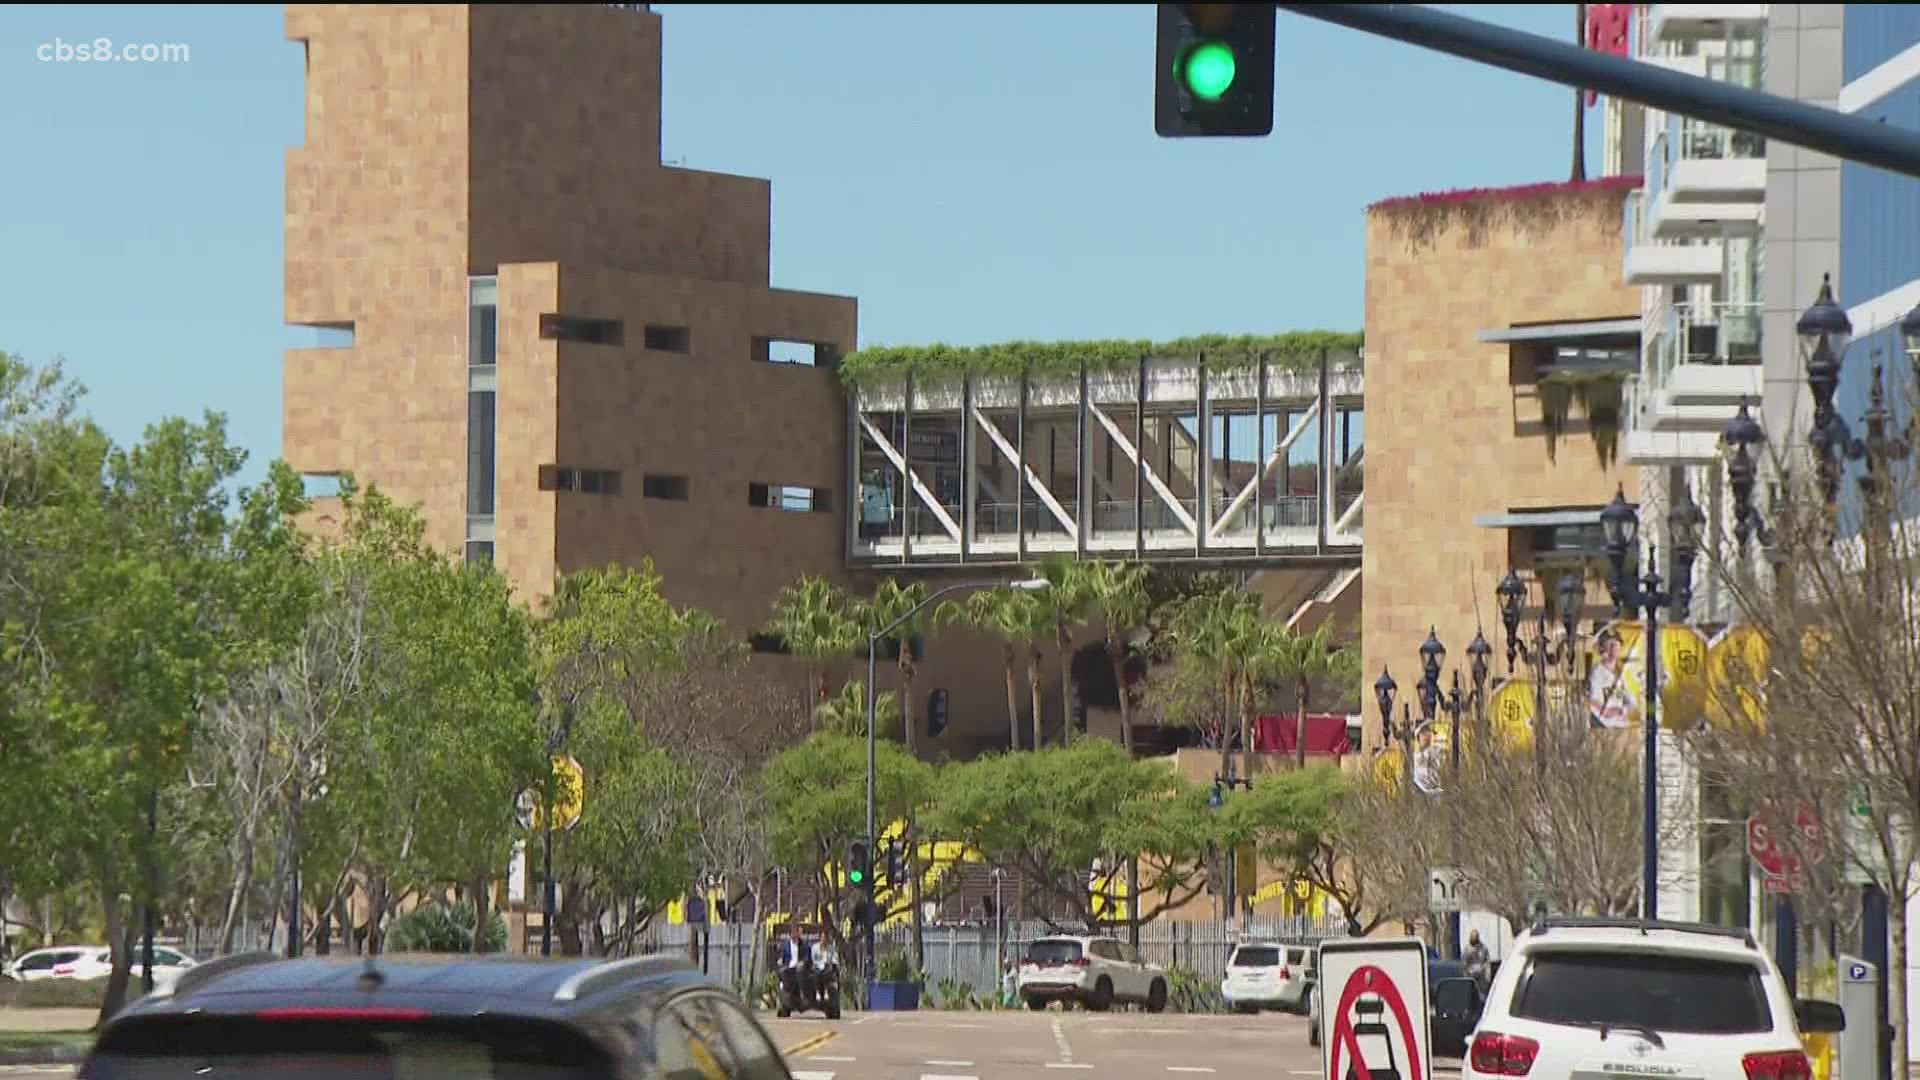 A flood of fans are expected to hit downtown tomorrow, many of which will ride public transportation. The area is bustling with preparations ahead of Opening Day.